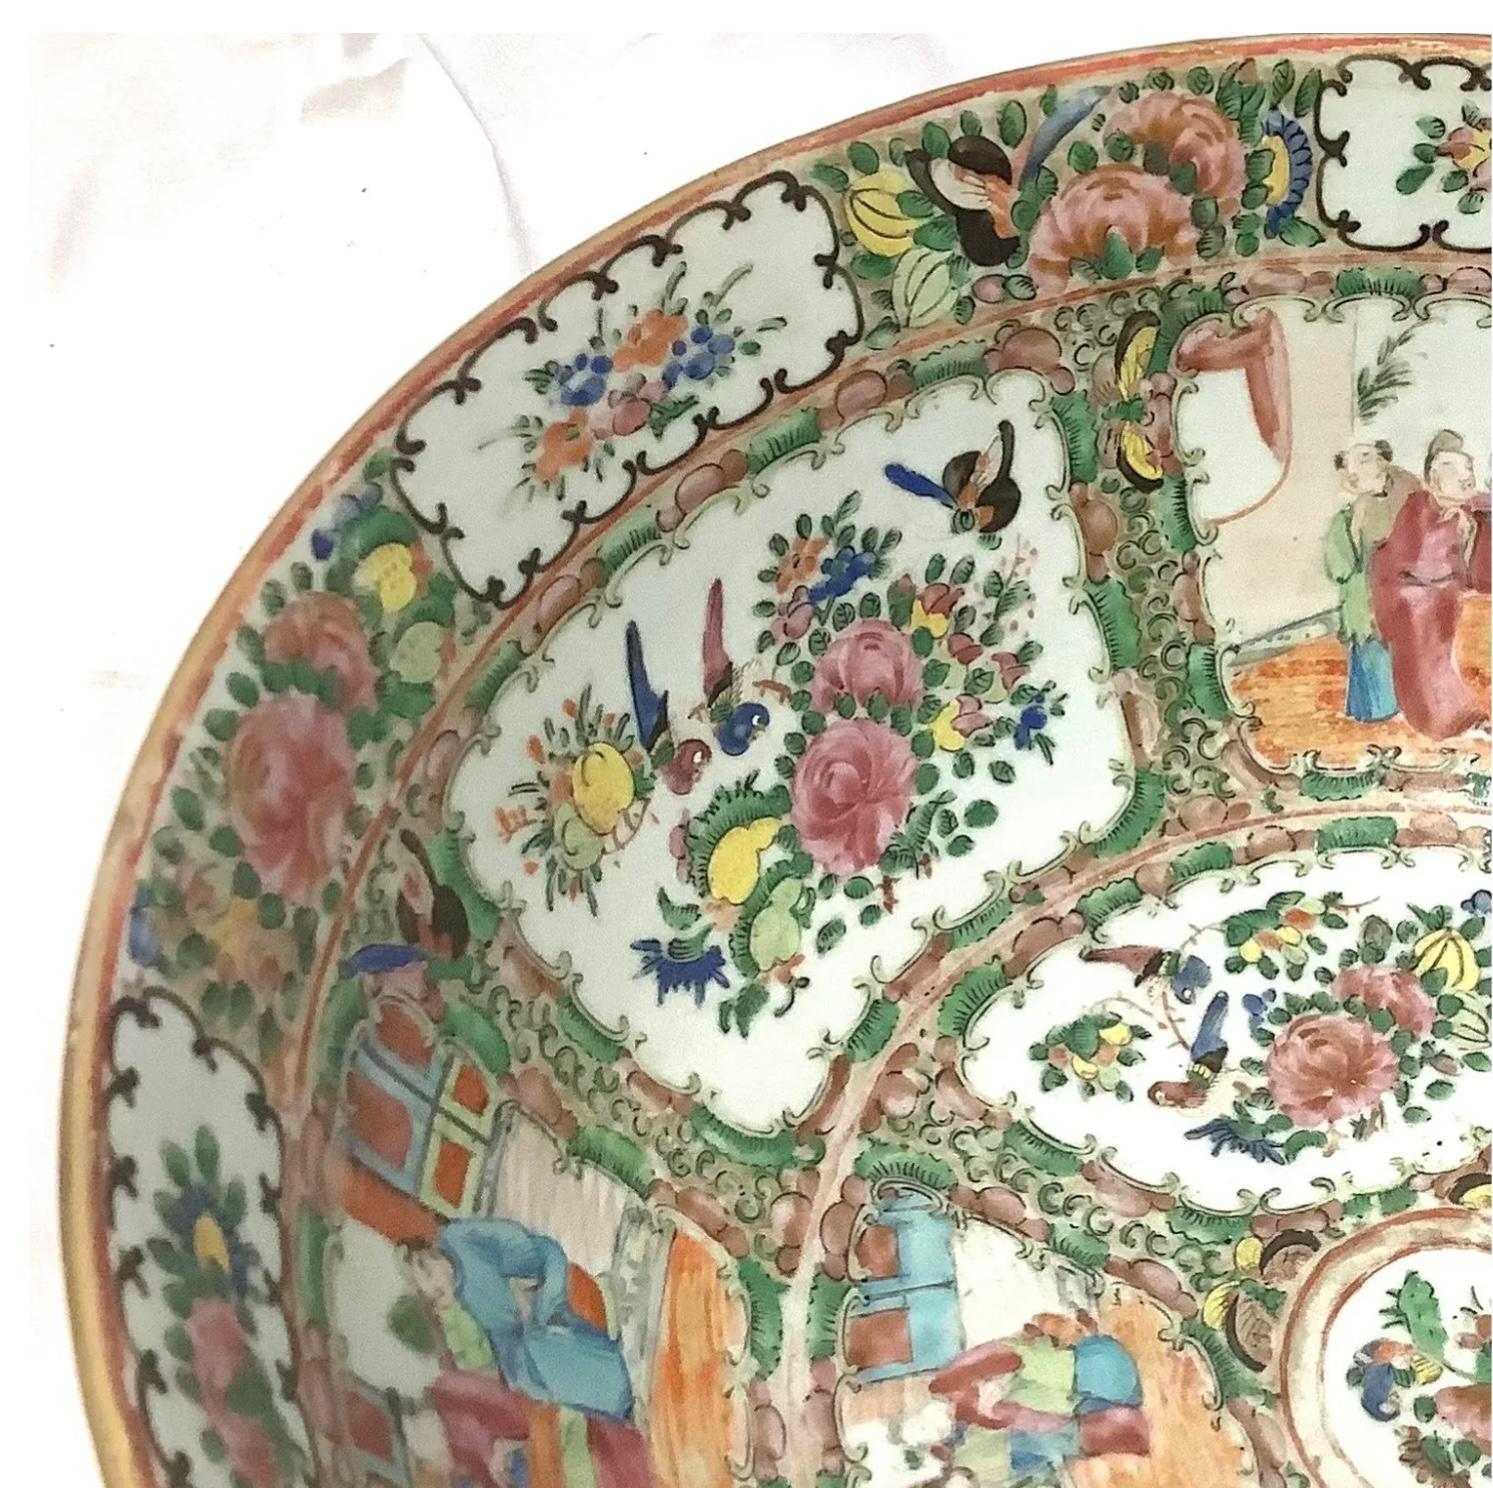 Large colorful vintage Chinese famille rose medallion porcelain punchbowl. Features classic oriental scenes with Chinese people throughout. Overall, the piece is in wonderful condition with a beautiful vivid multi-color palette.

